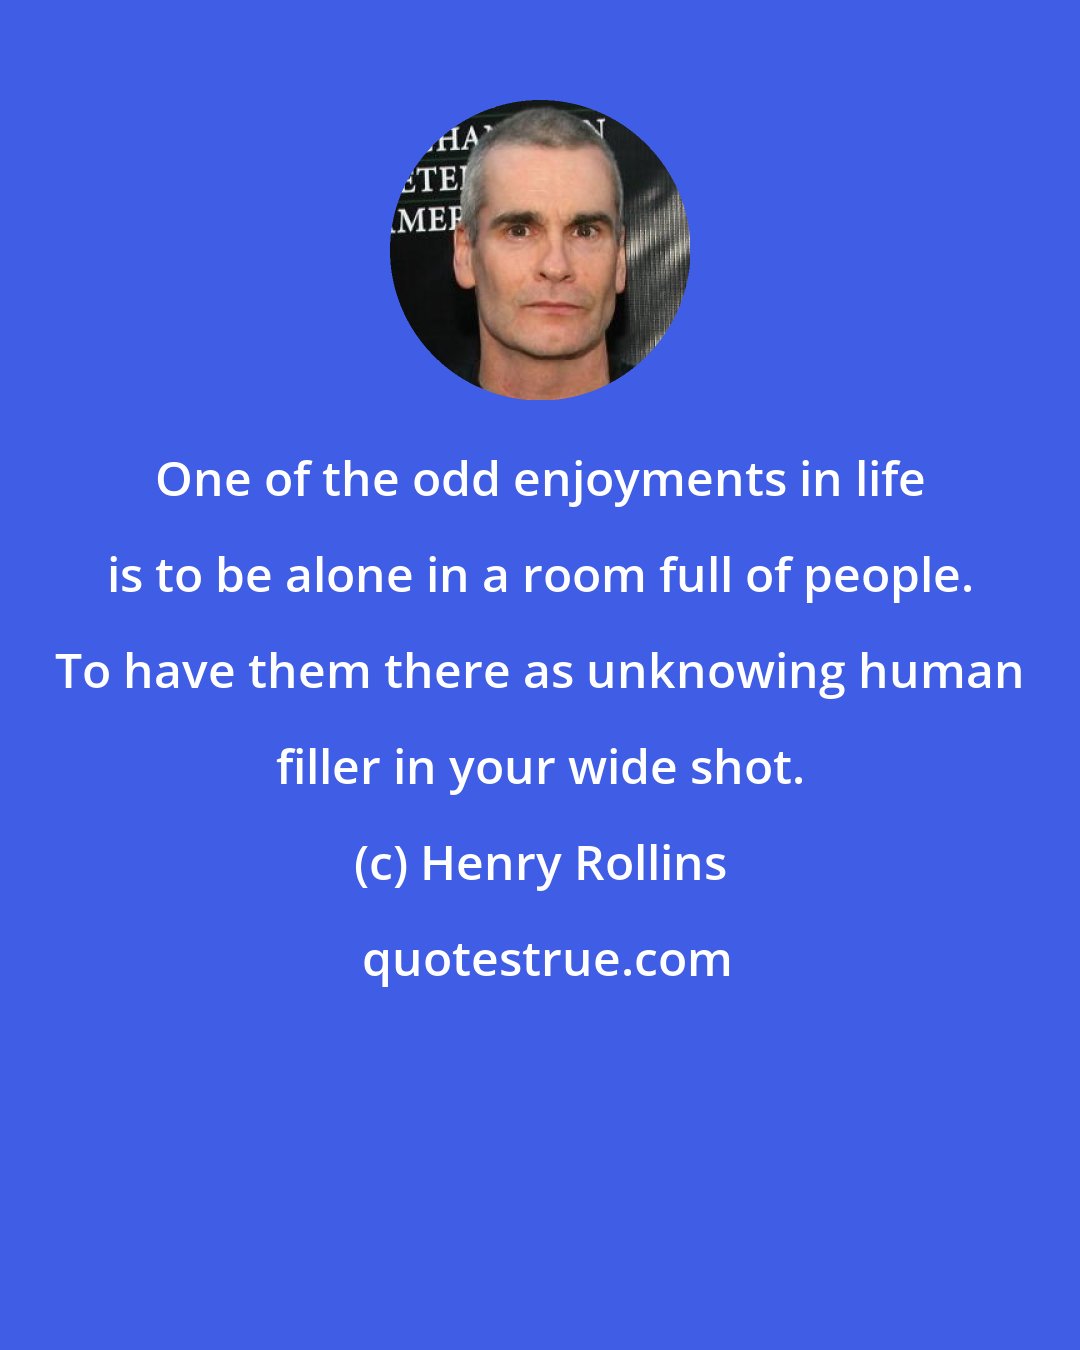 Henry Rollins: One of the odd enjoyments in life is to be alone in a room full of people. To have them there as unknowing human filler in your wide shot.